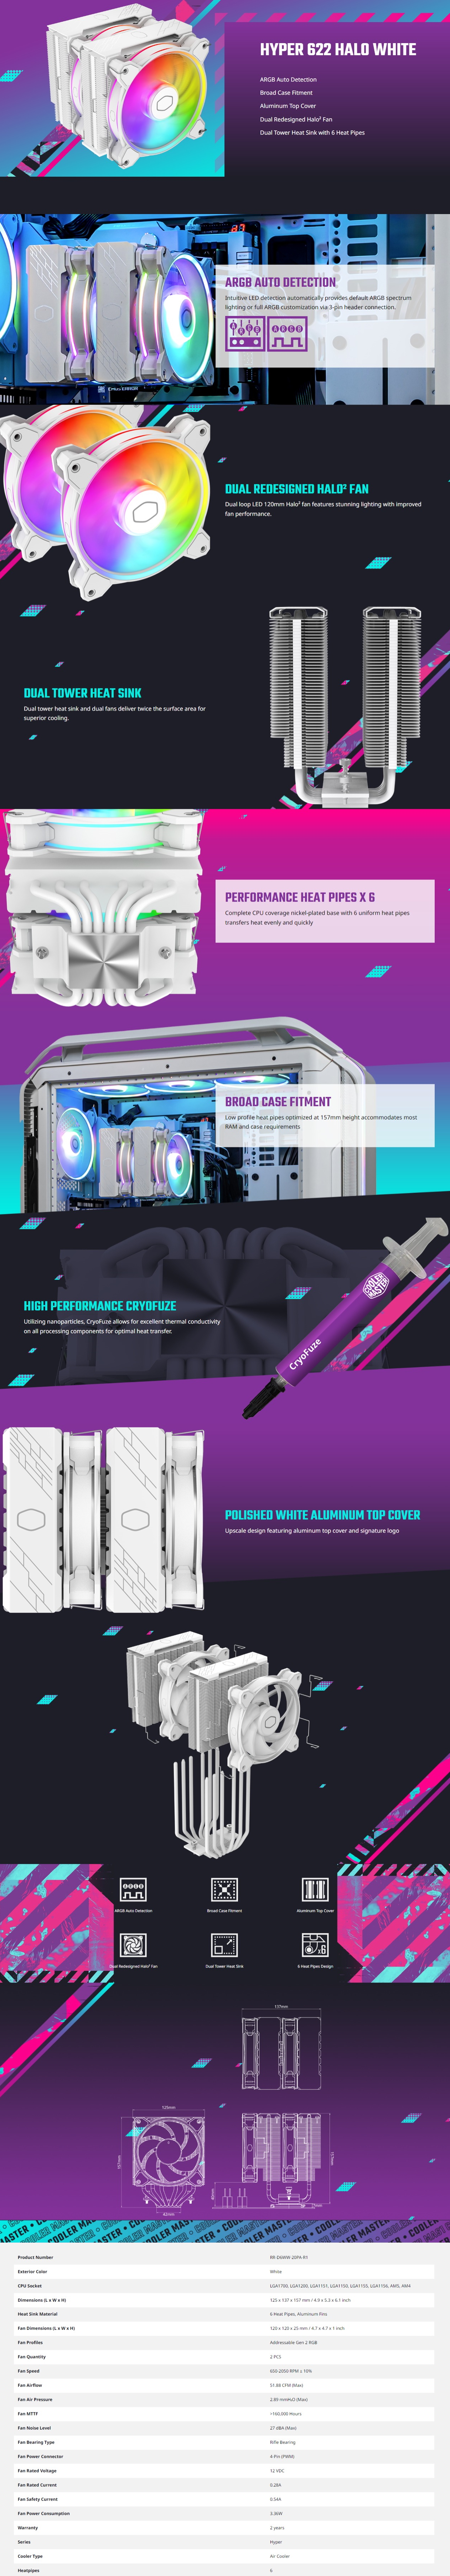 A large marketing image providing additional information about the product Cooler Master Hyper 622 Halo - White - Additional alt info not provided